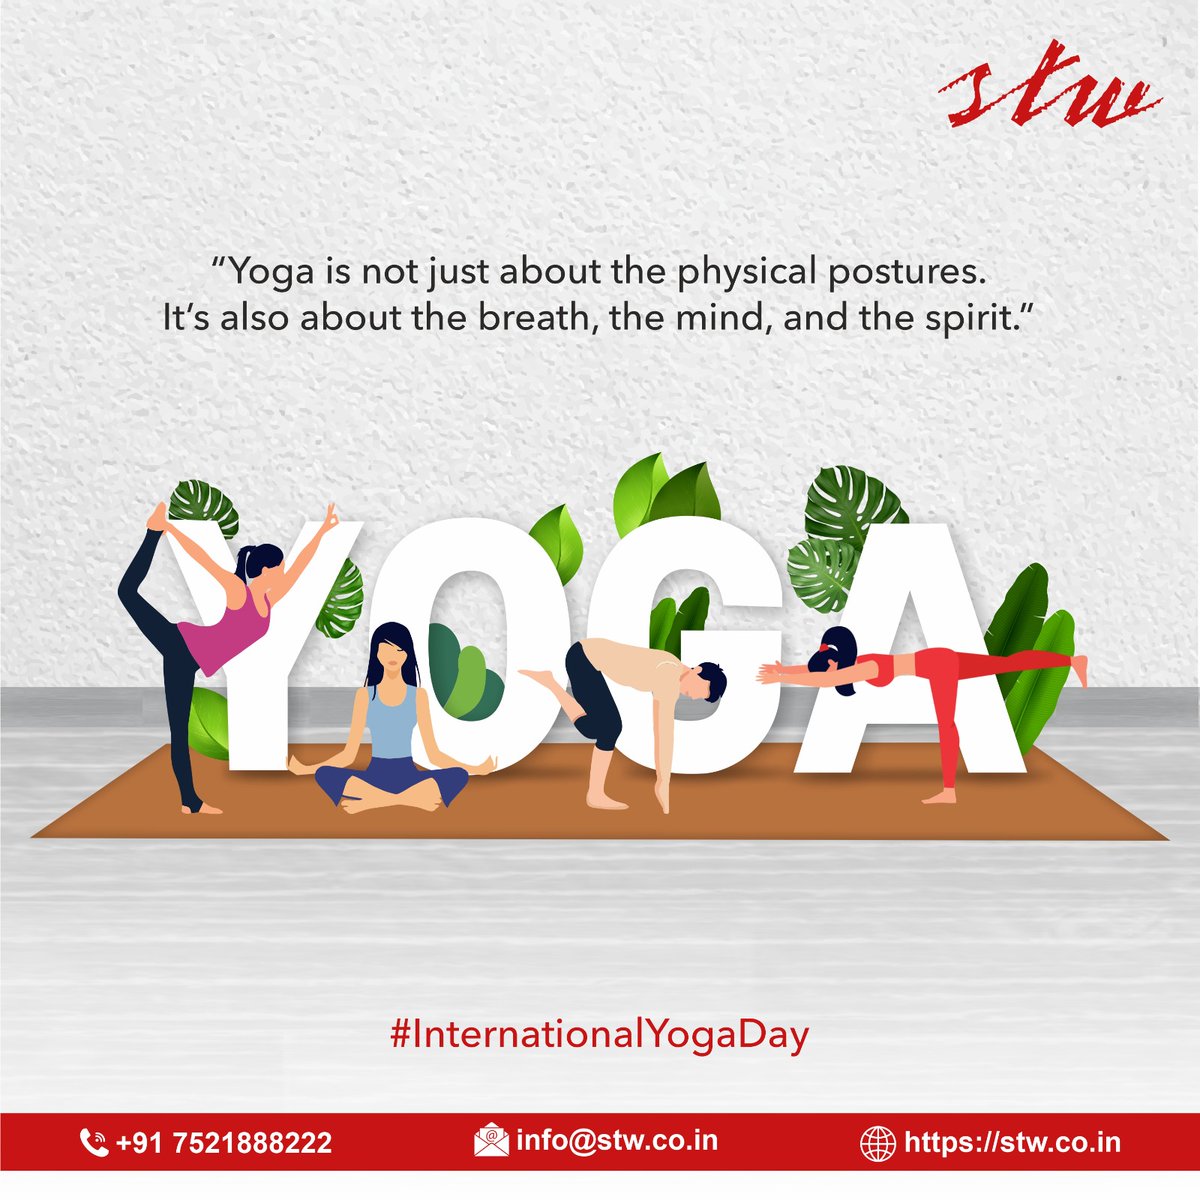 “Yoga is the journey of the self, to the self, through the self.”
On this peaceful occasion, STW wishes you a very Happy Yoga Day.
.
.
.
#yogaday2023 #happyyogaday #digitalmarketingservices #seo #digitalads #advertisingagency #stw #sigmatradewings #thelargestadvertisingagency